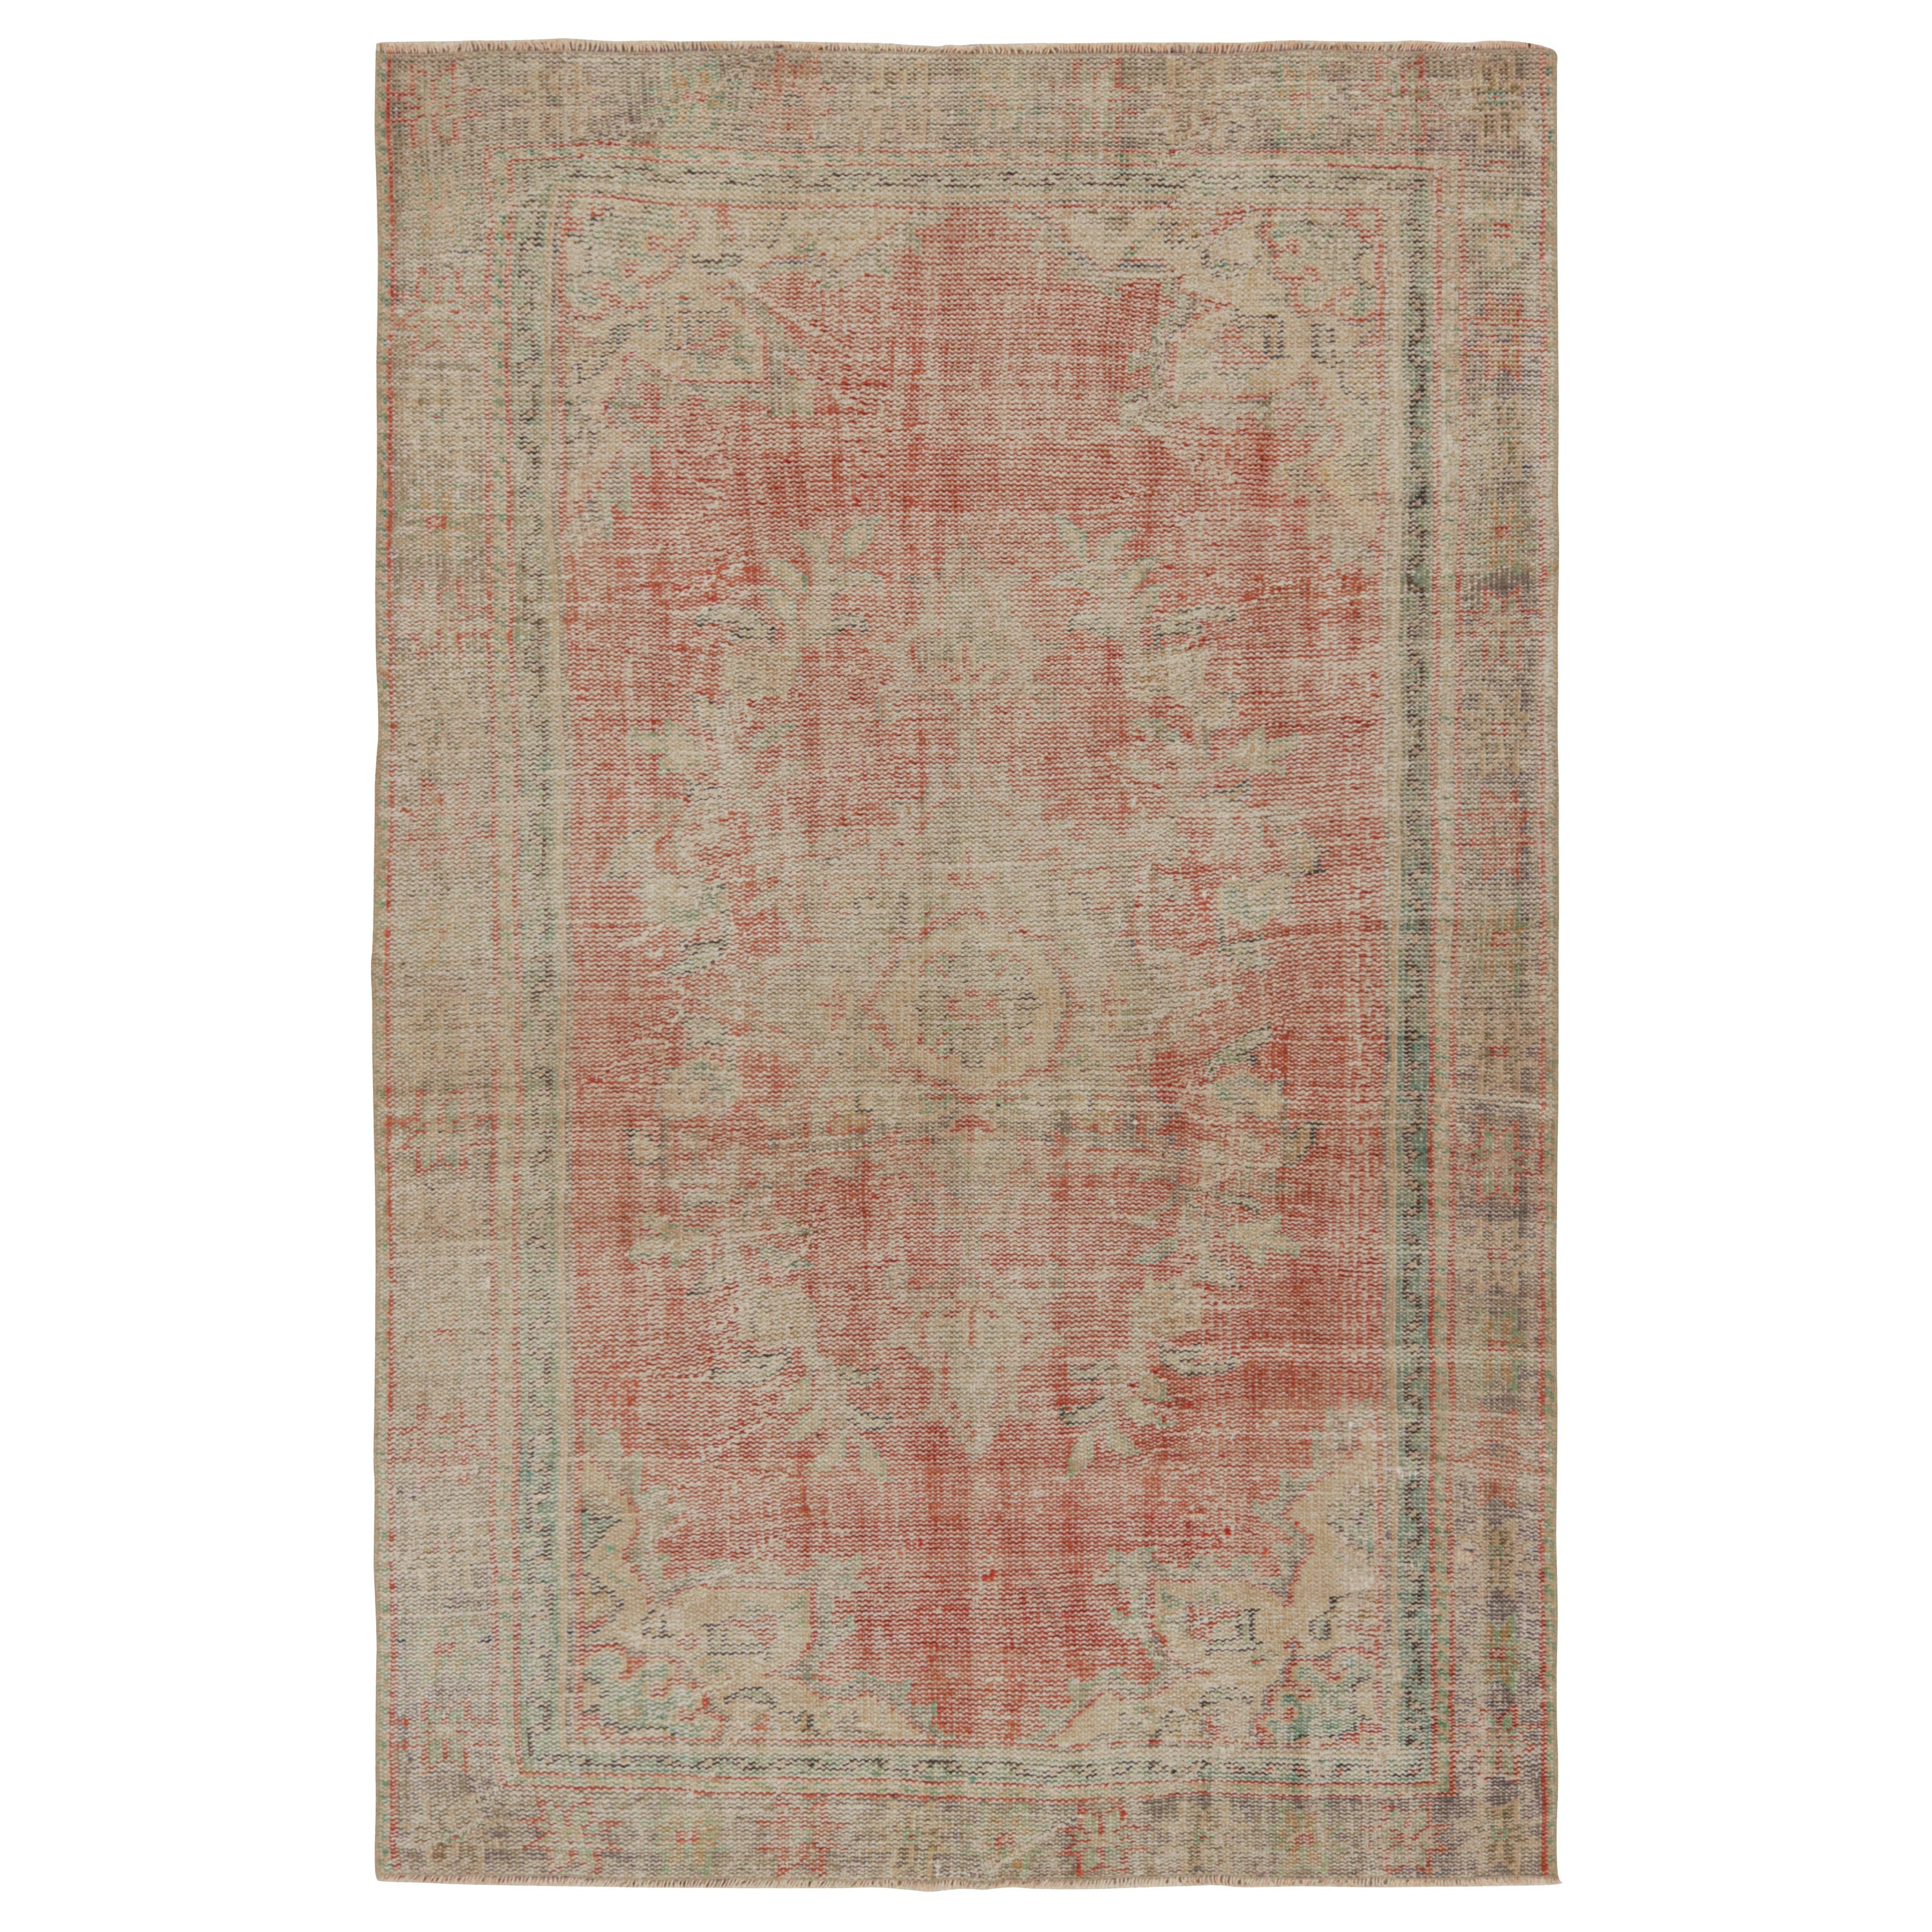 Vintage European Style Rug, with Geometric Floral Patterns, from Rug & Kilim  For Sale